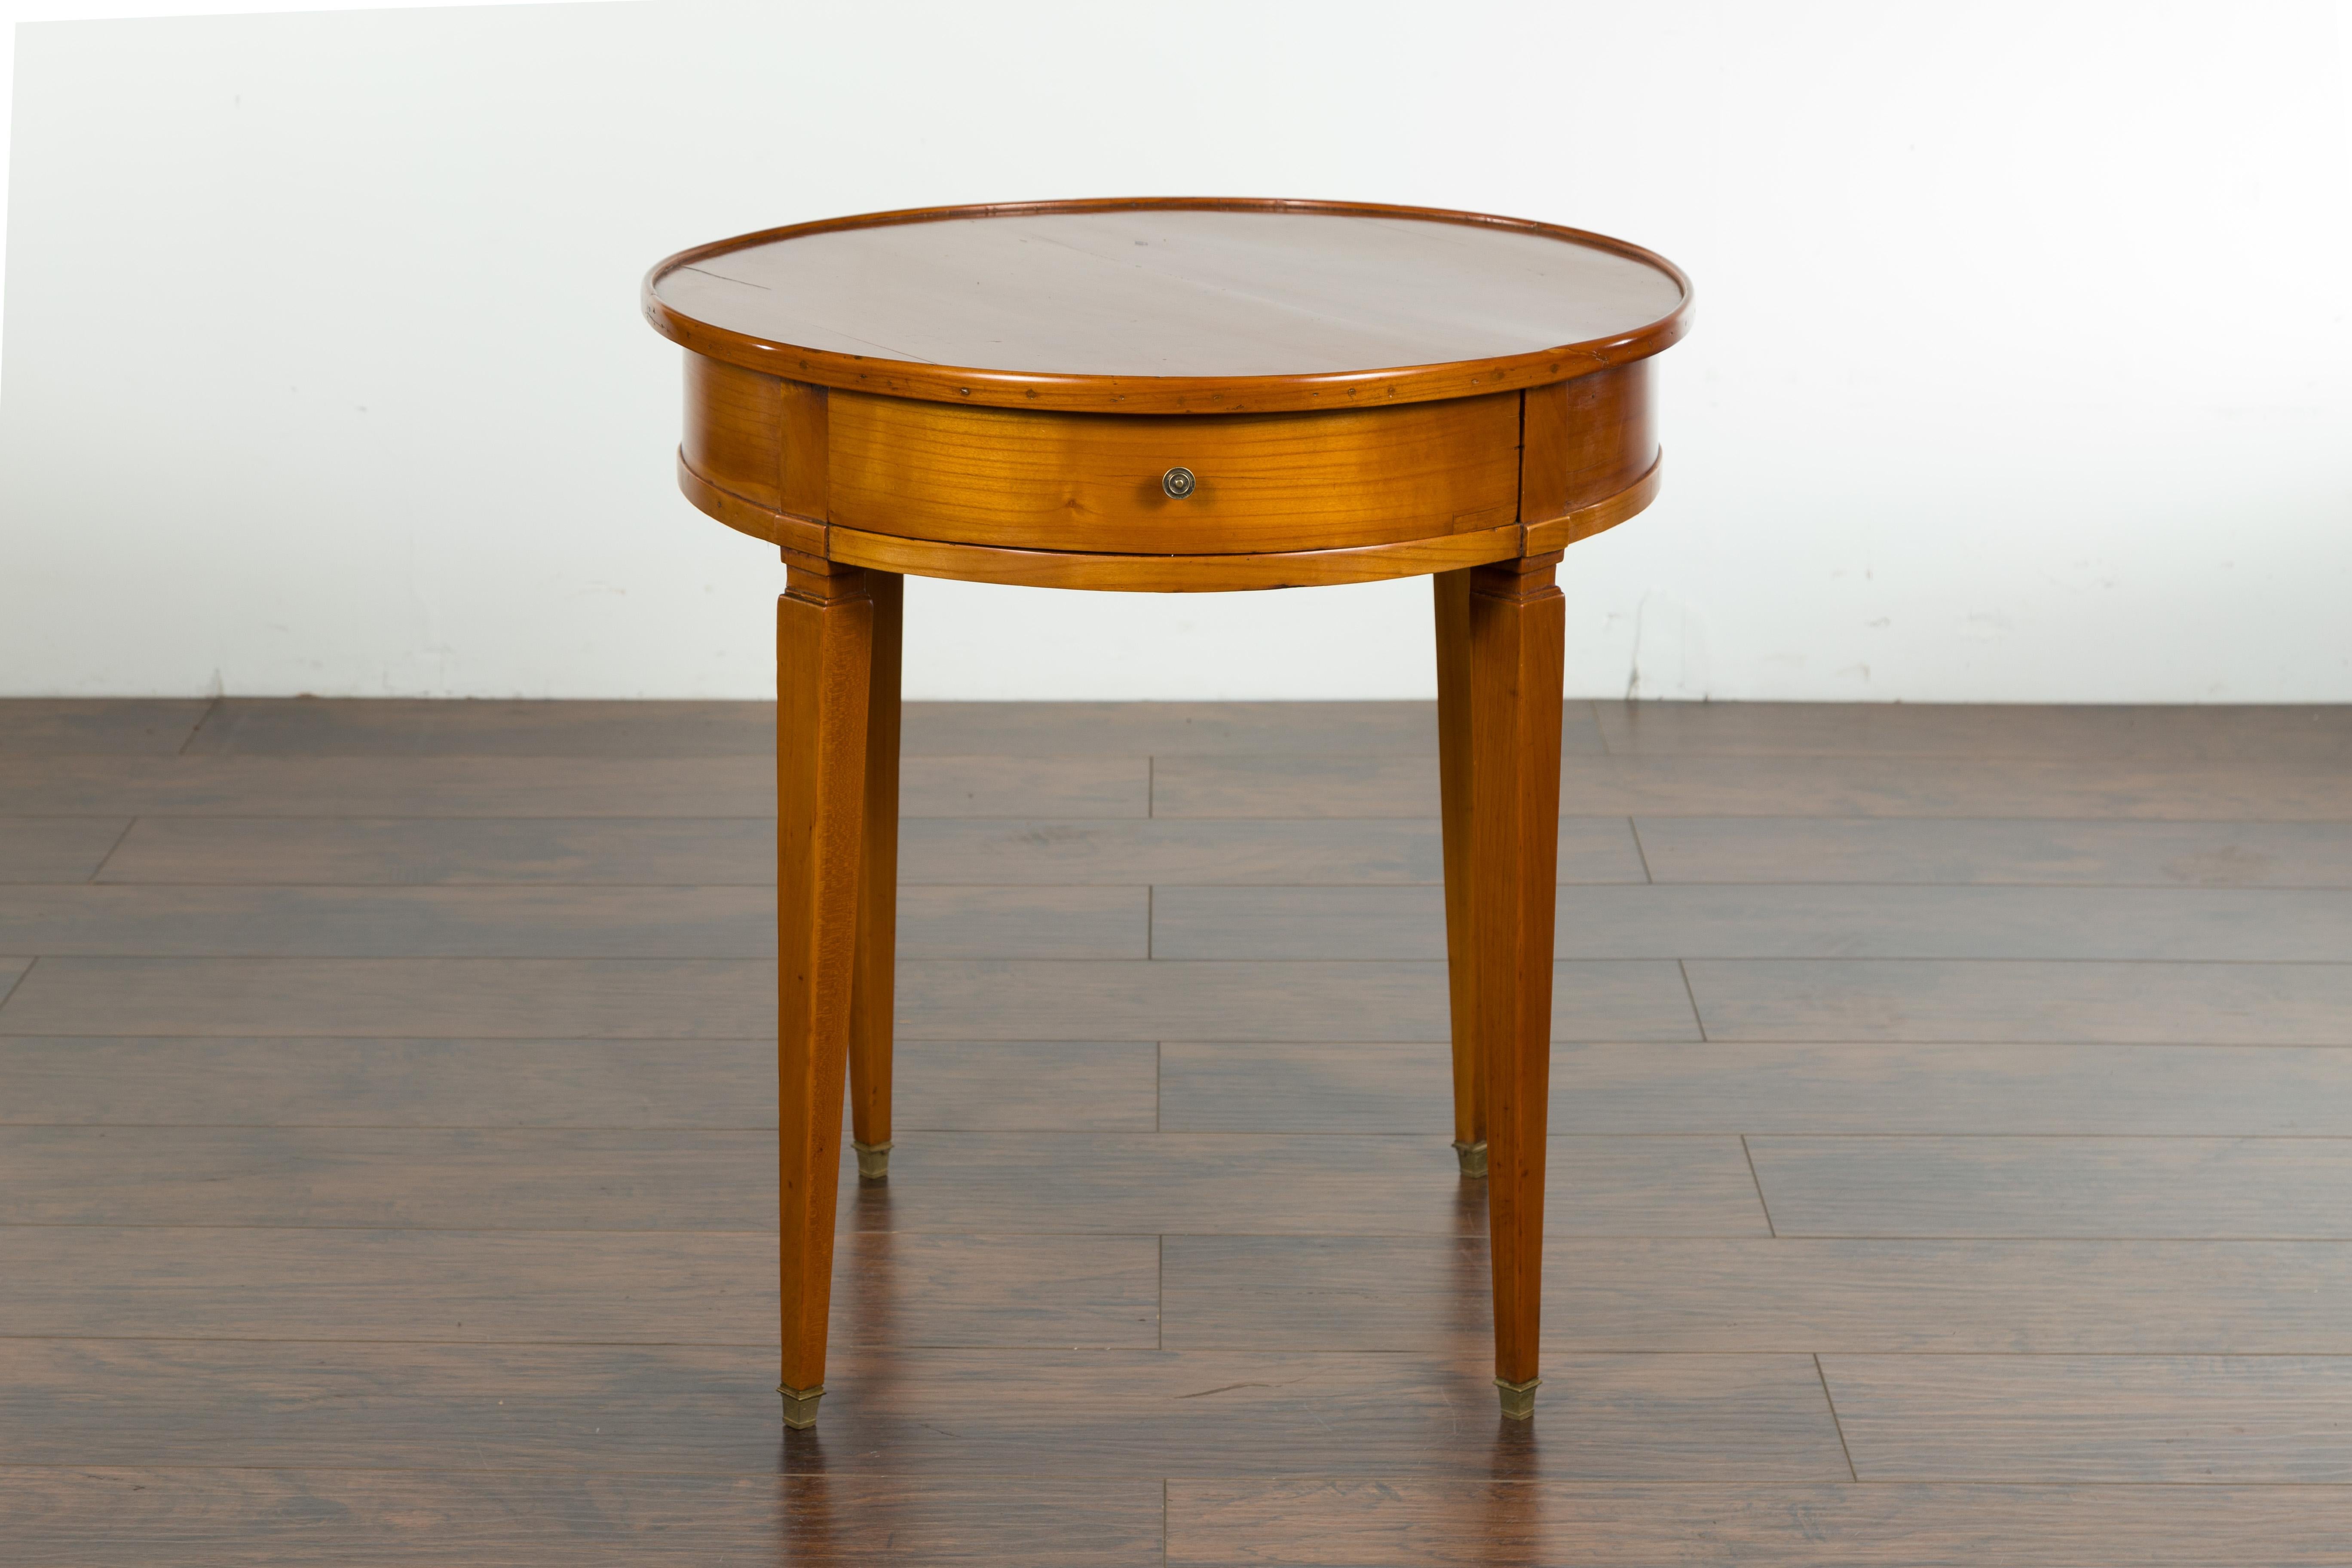 A French Napoléon III period walnut side table from the mid-19th century, with single drawer, tapered legs and brass feet. Created in France at the beginning of Emperor Napoléon III's reign, this walnut side table features a circular top sitting